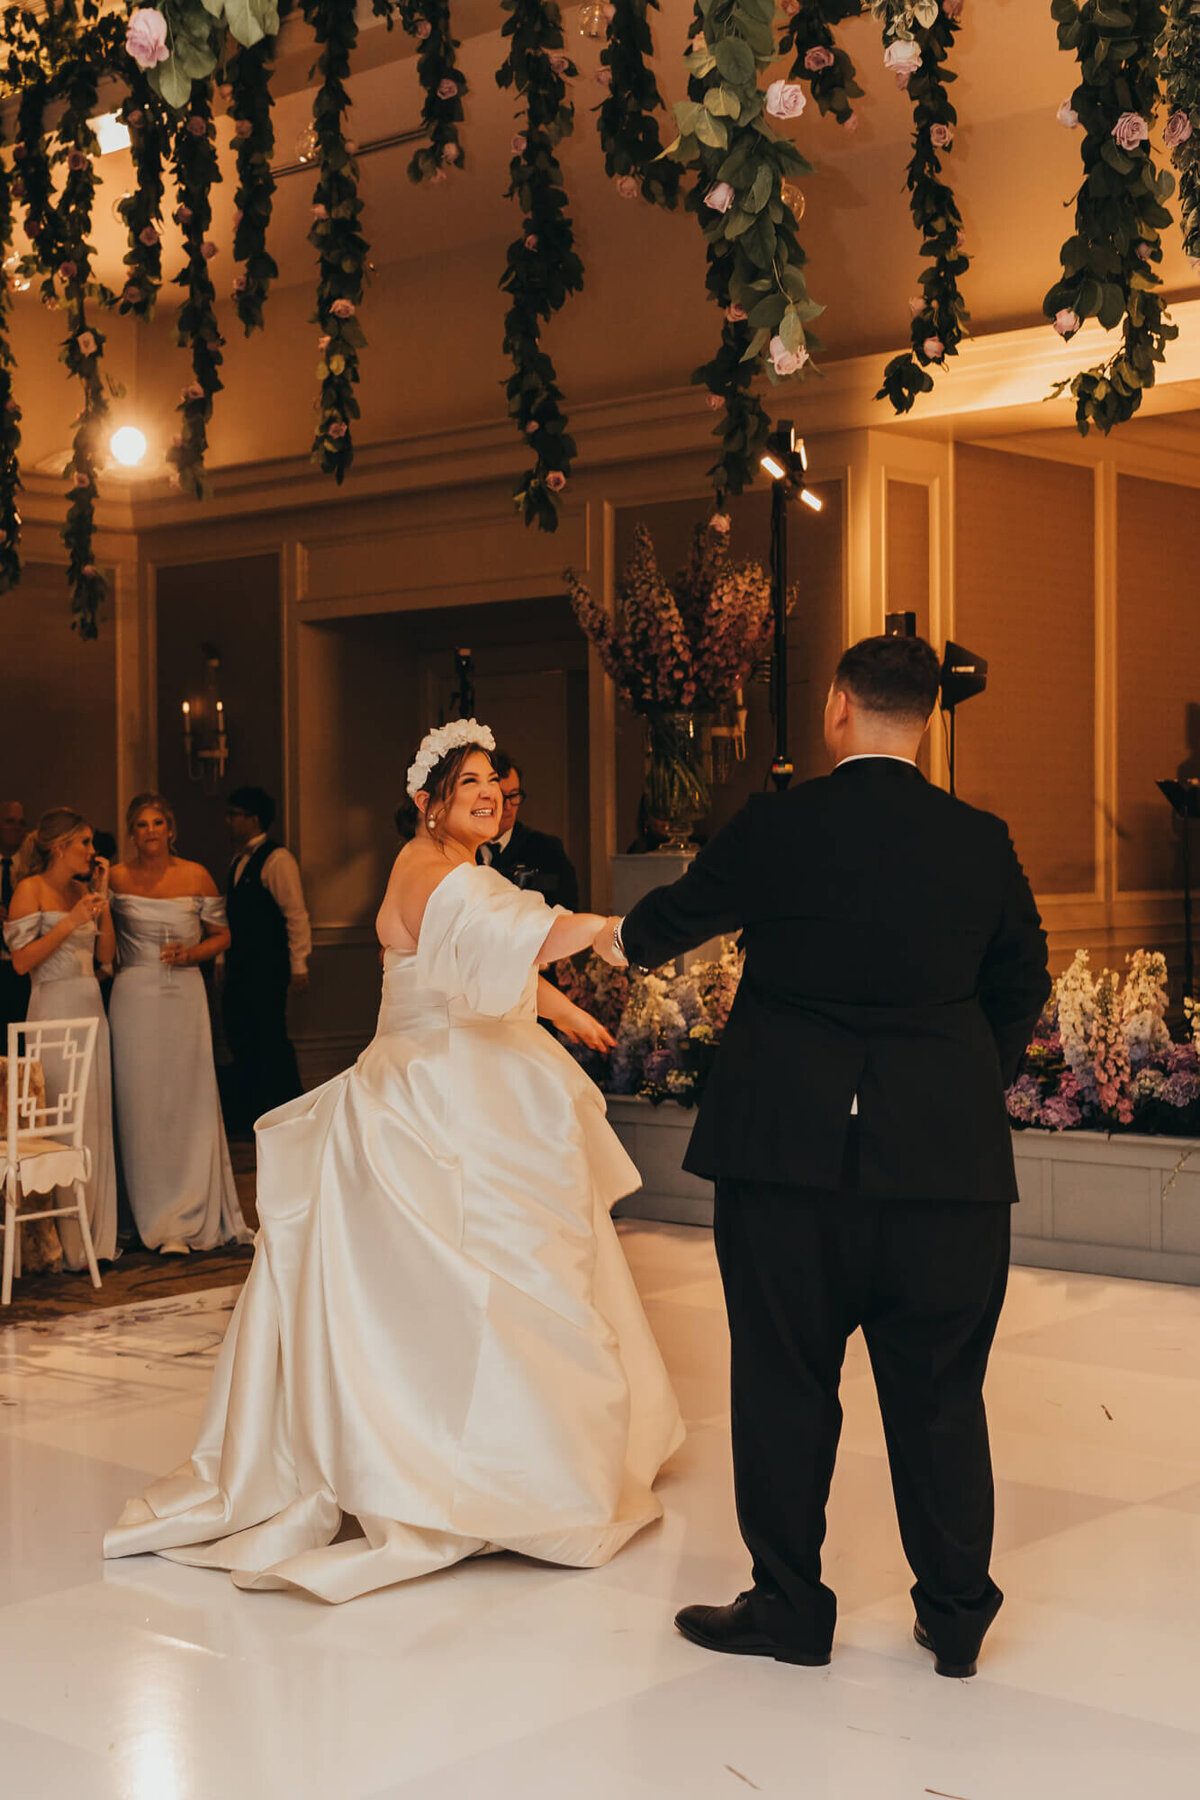 bride and groom share a first dance among their guests.